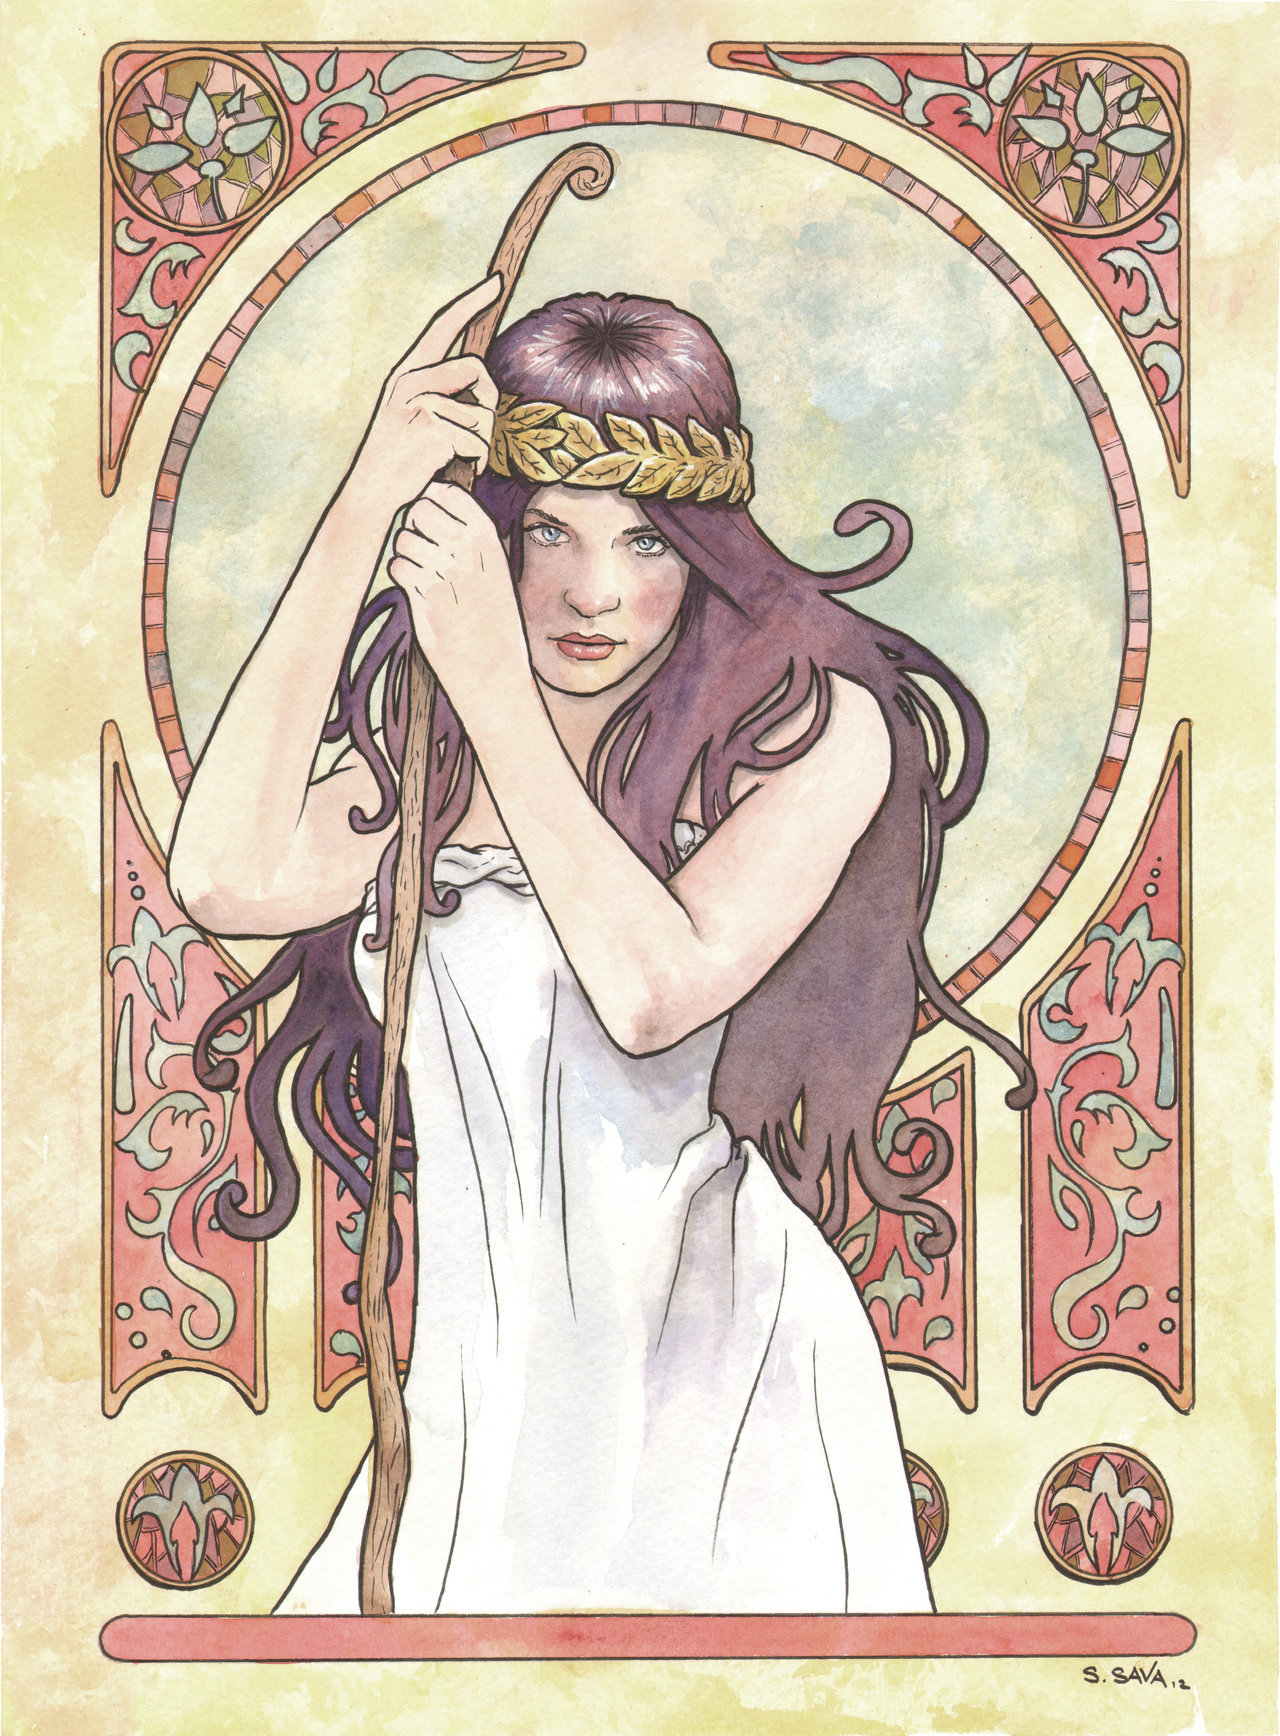 Another attempt at an Alphonse Mucha style. I’m learning a lot. And trying to add more bits of design into each one. Watercolor and ink on 11x15 inch watercolor paper The photo reference/inspiration was...